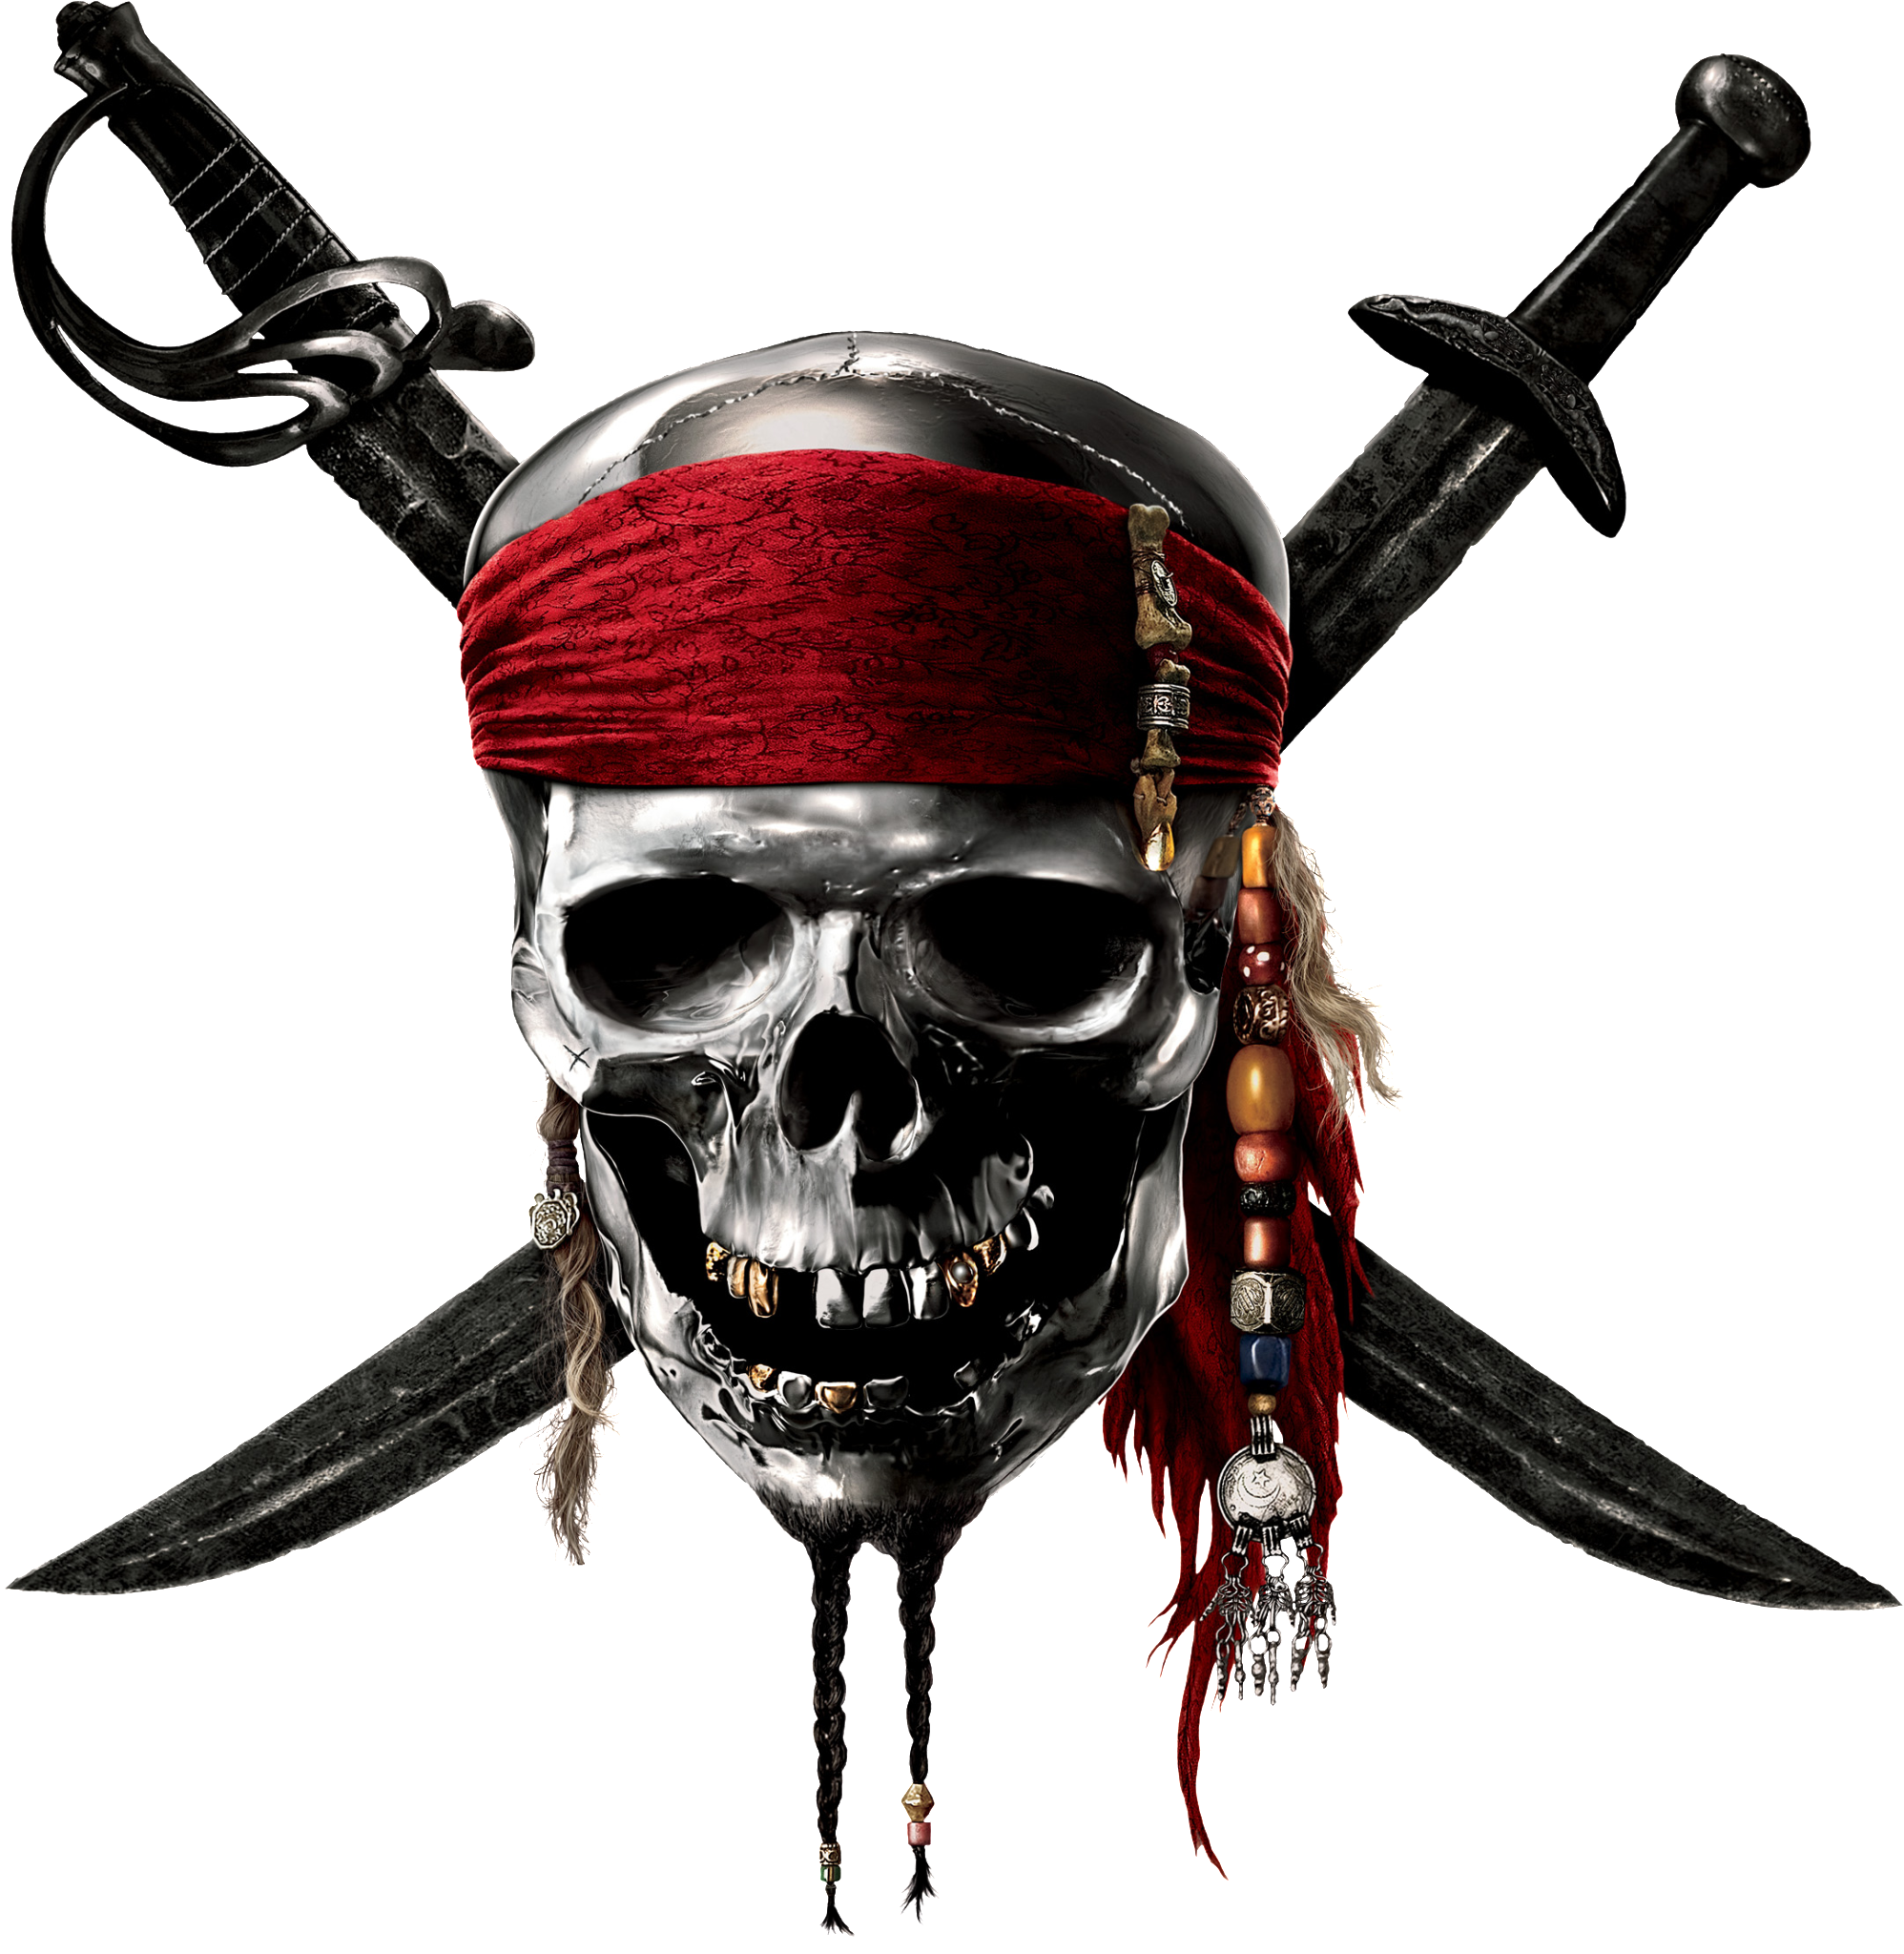 Image Of Pirate